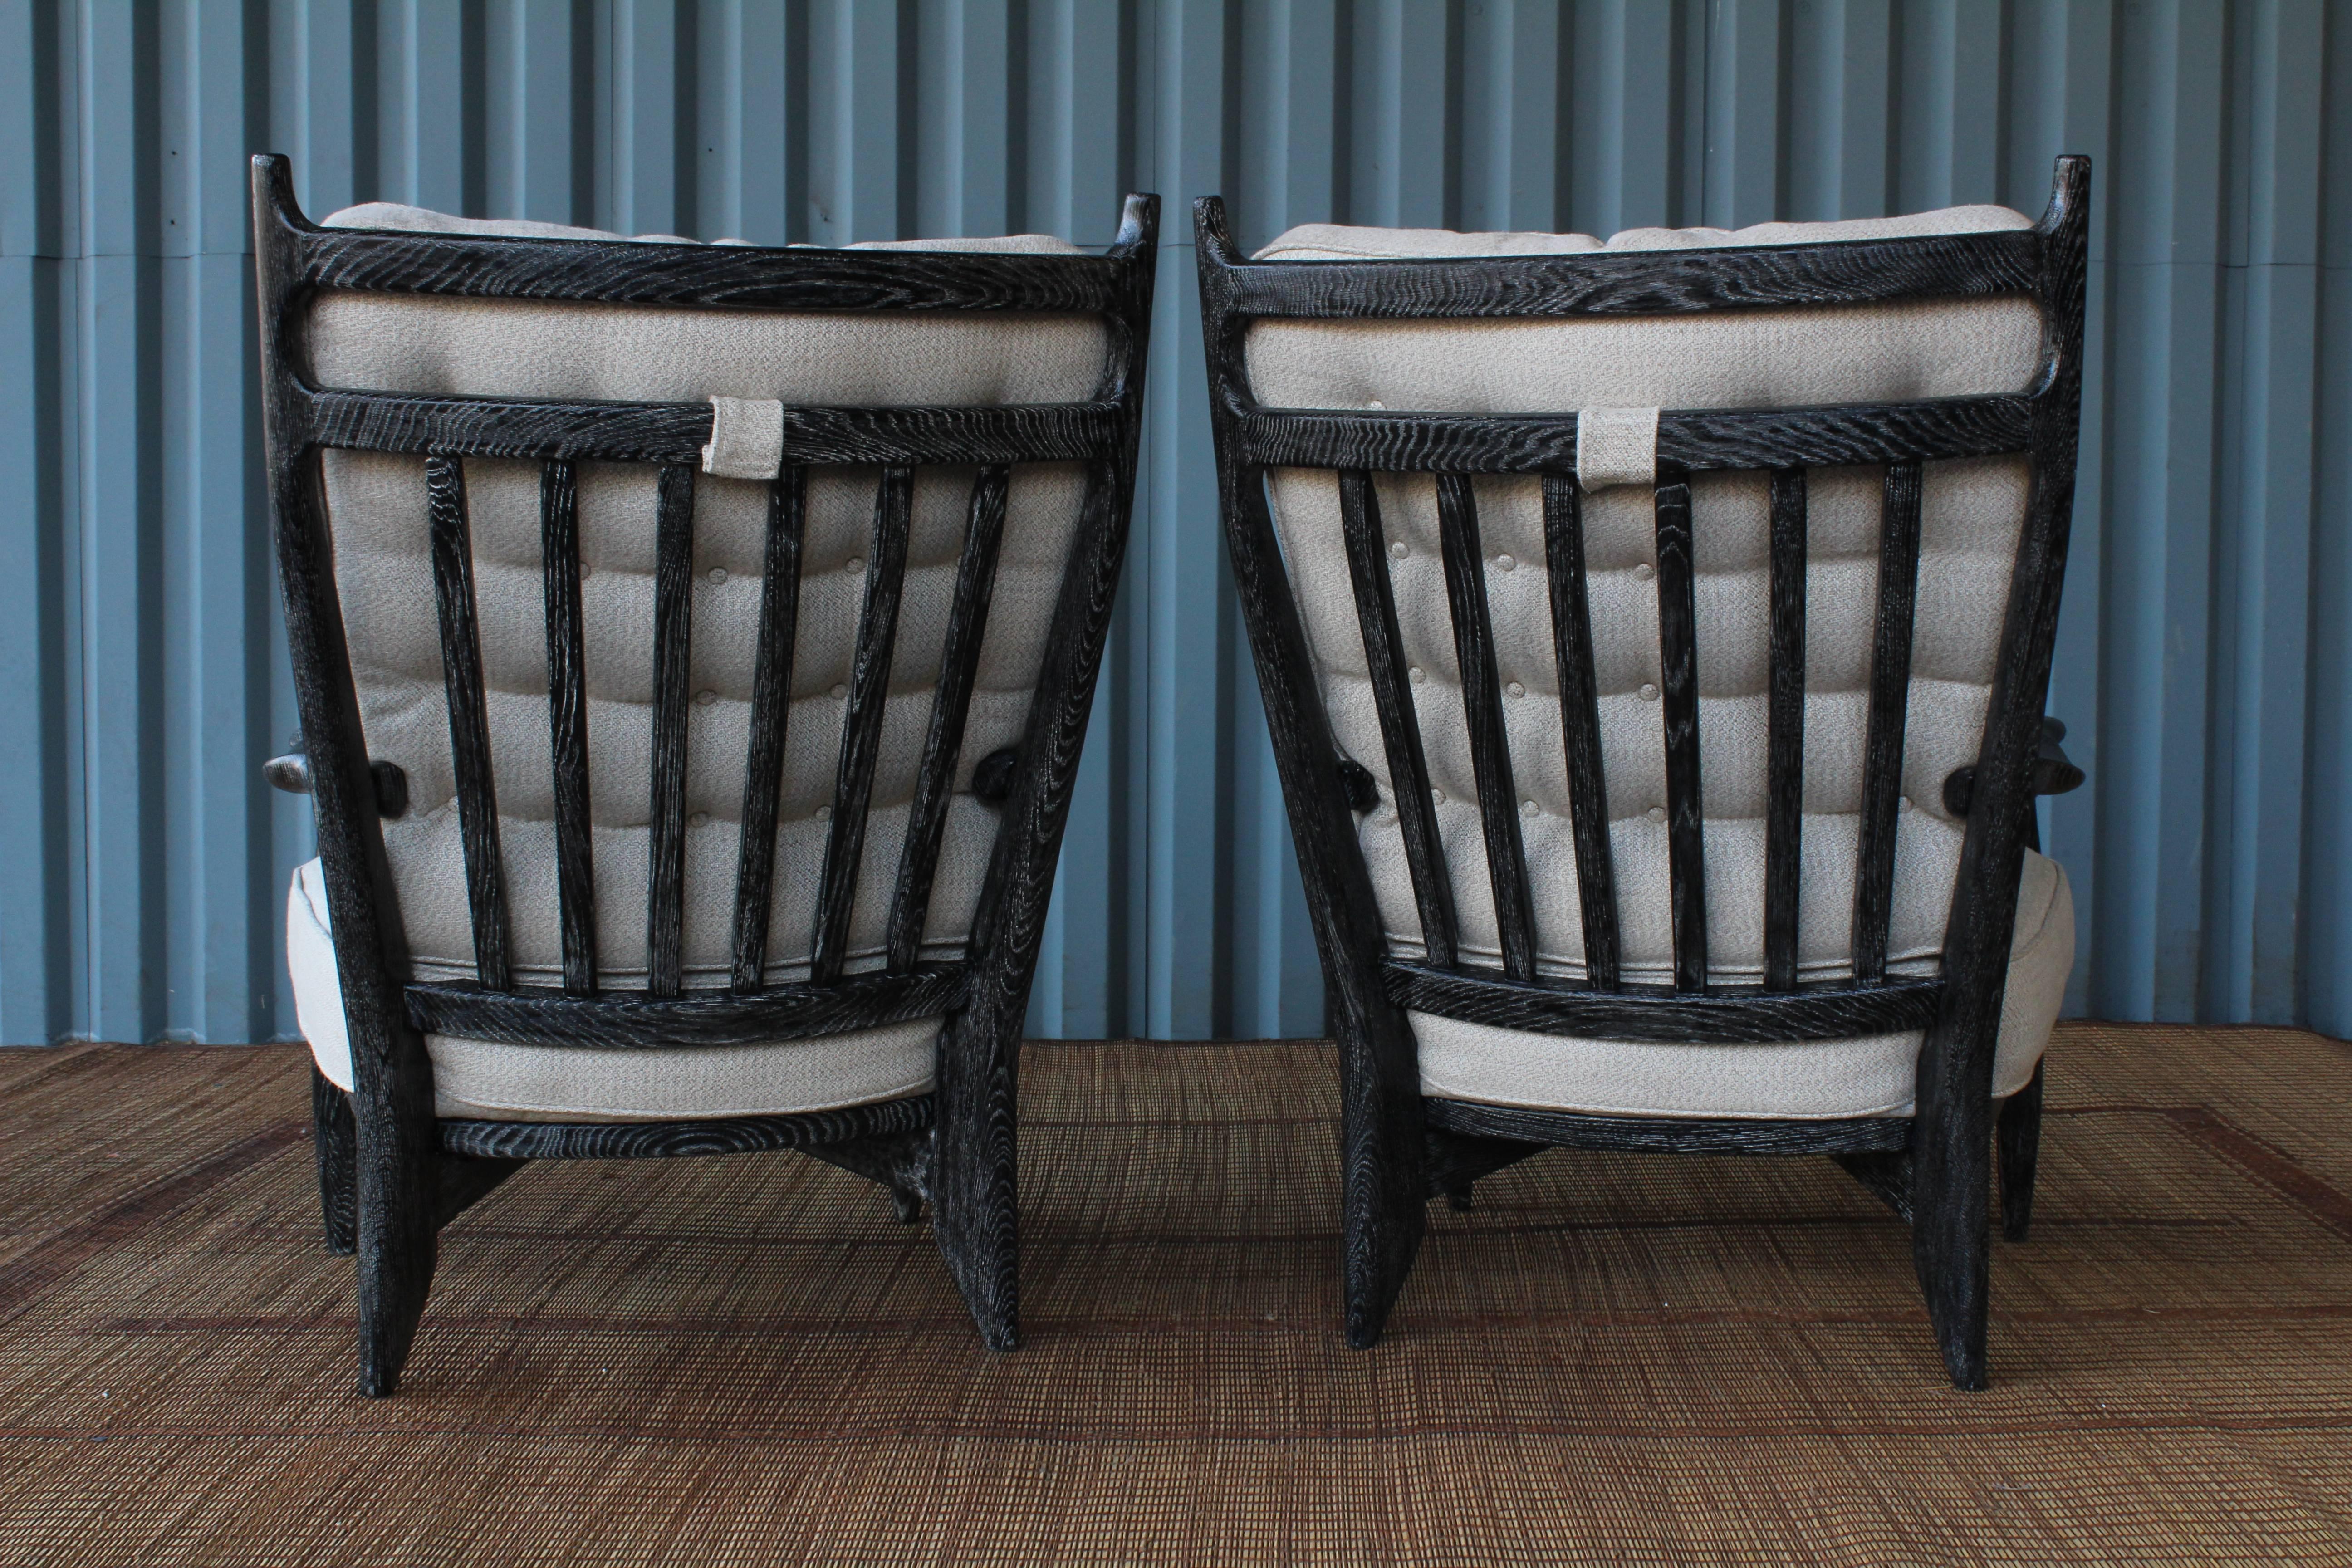 Pair of 'Edouard' armchairs by Guillerme et Chambron for Votre Maison, France, 1960s. The pair have been updated in a black cérused oak finish and have new upholstered cushions in a subtle beige woven fabric.